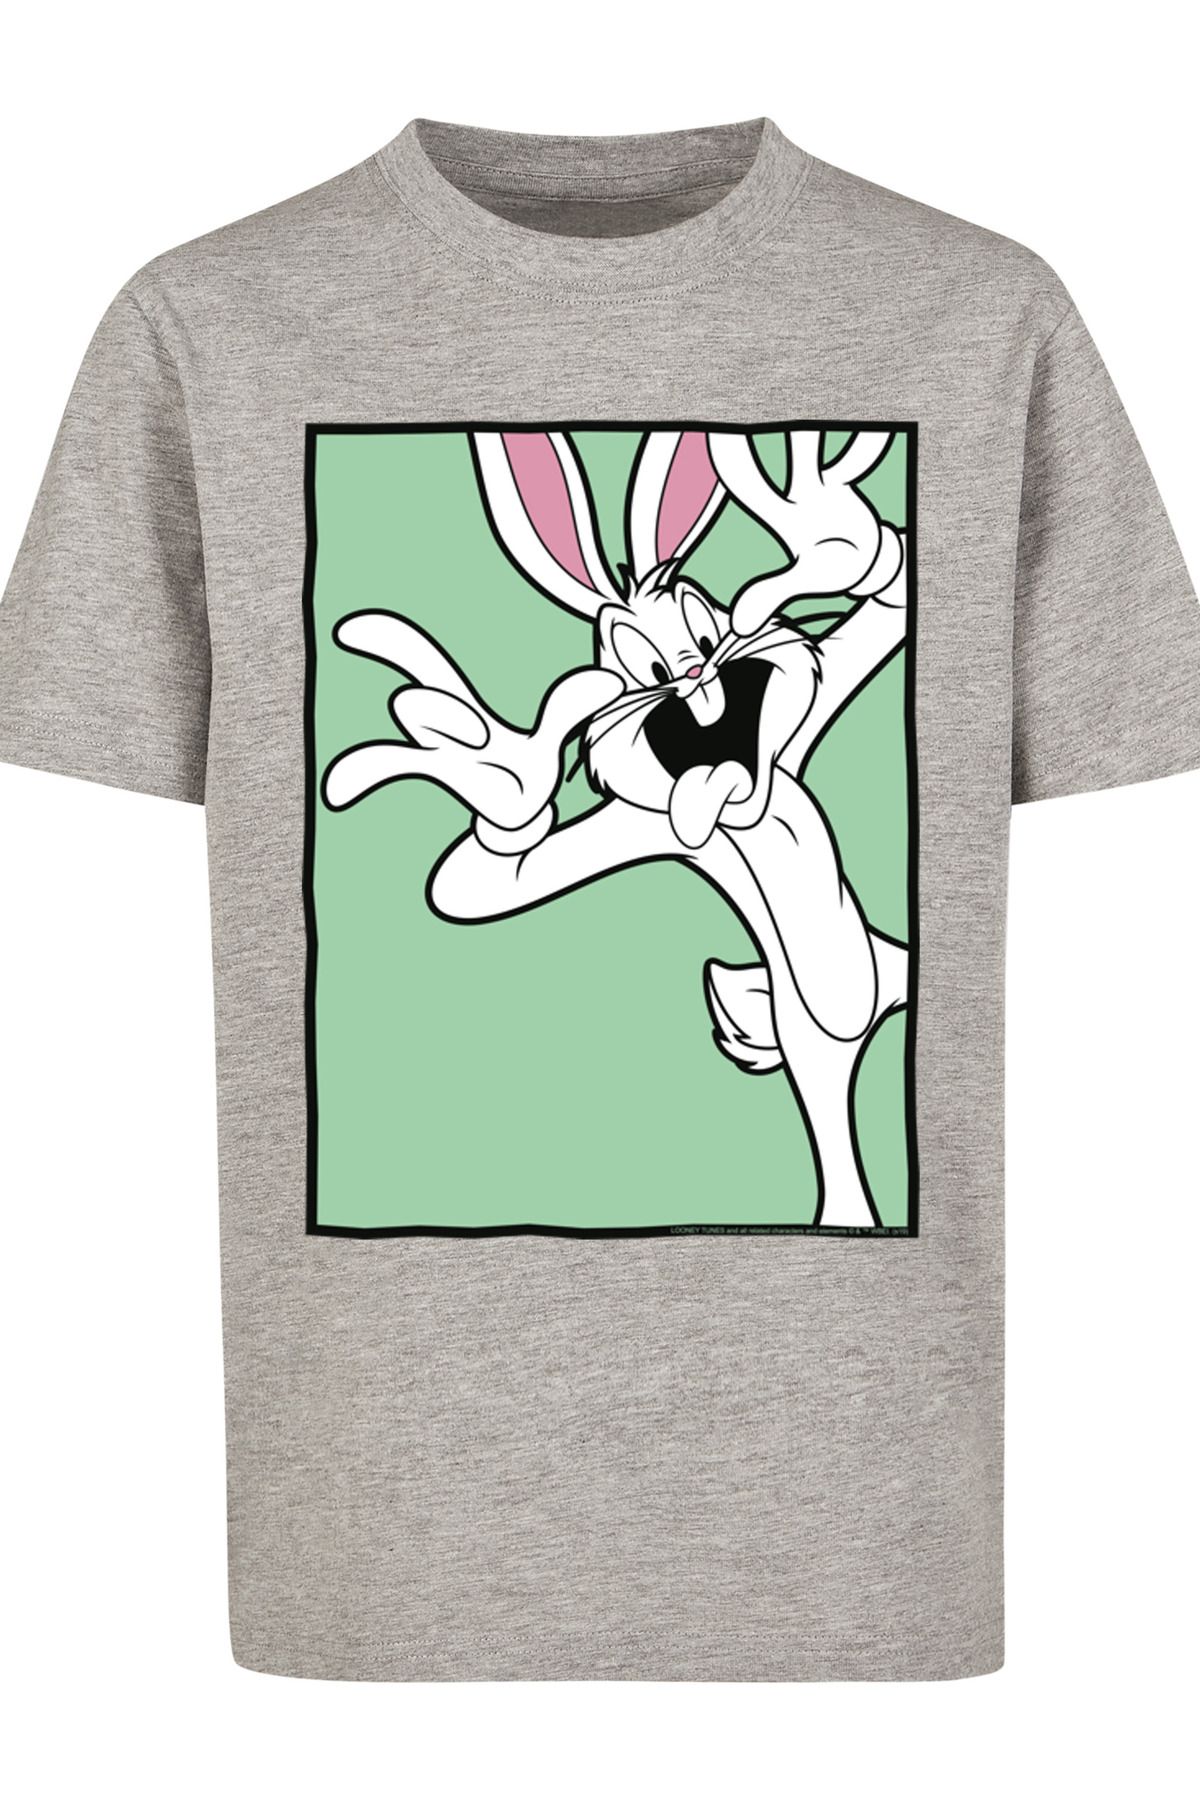 mit Looney Funny Bunny T- Face-WHT Kids Shirt Bugs F4NT4STIC Tunes Trendyol Basic Kinder -